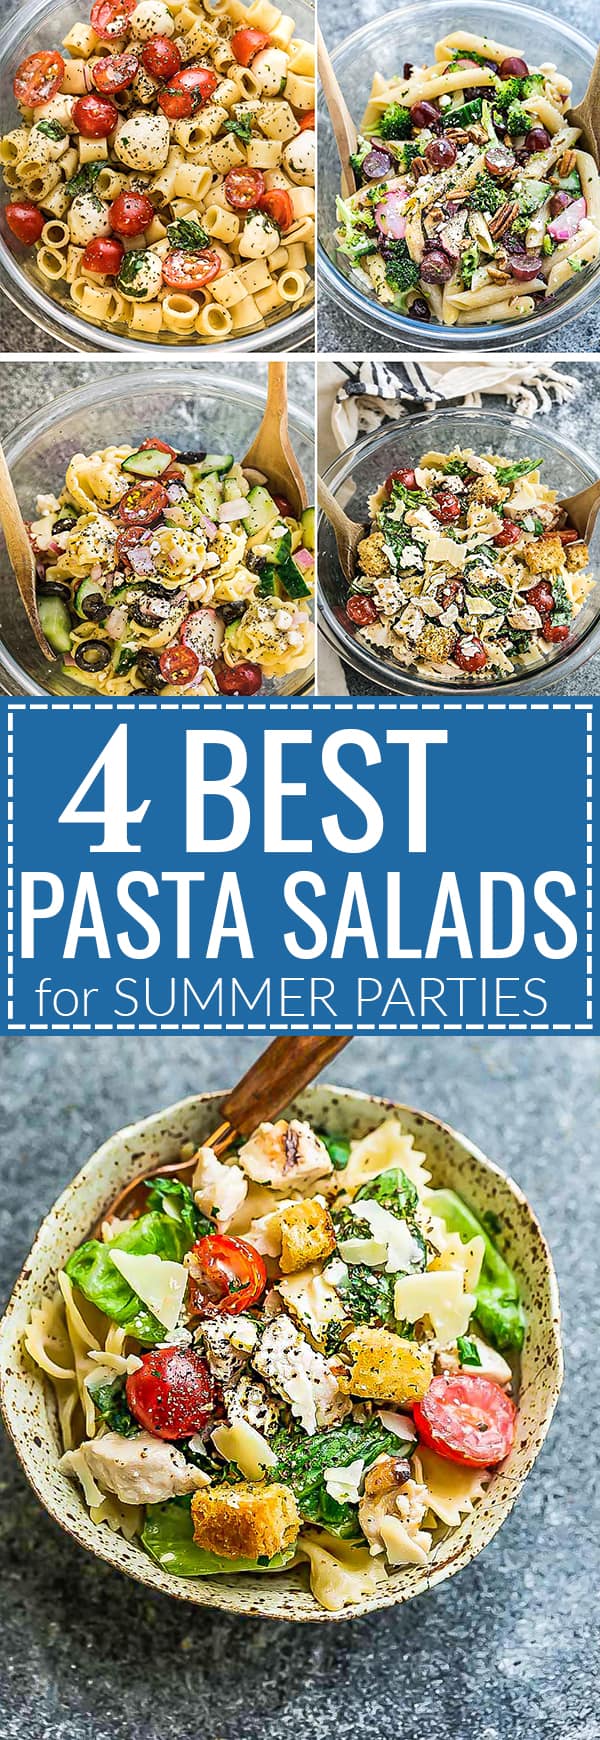 These are the Four Most Popular Pasta Salads that everyone looks for. Caprese, Chicken Caesar, Greek Tortellini and Broccoli Pasta Salad. They are the perfect side dish to bring to summer potlucks, parties, Memorial Day / Fourth of July grillouts/barbecues and picnics. Best of all, they are all so easy to make and easy to customize with an option for homemade dressing. Works great for Sunday meal prep and leftovers are delicious for school or work lunchboxes or lunchbowls.